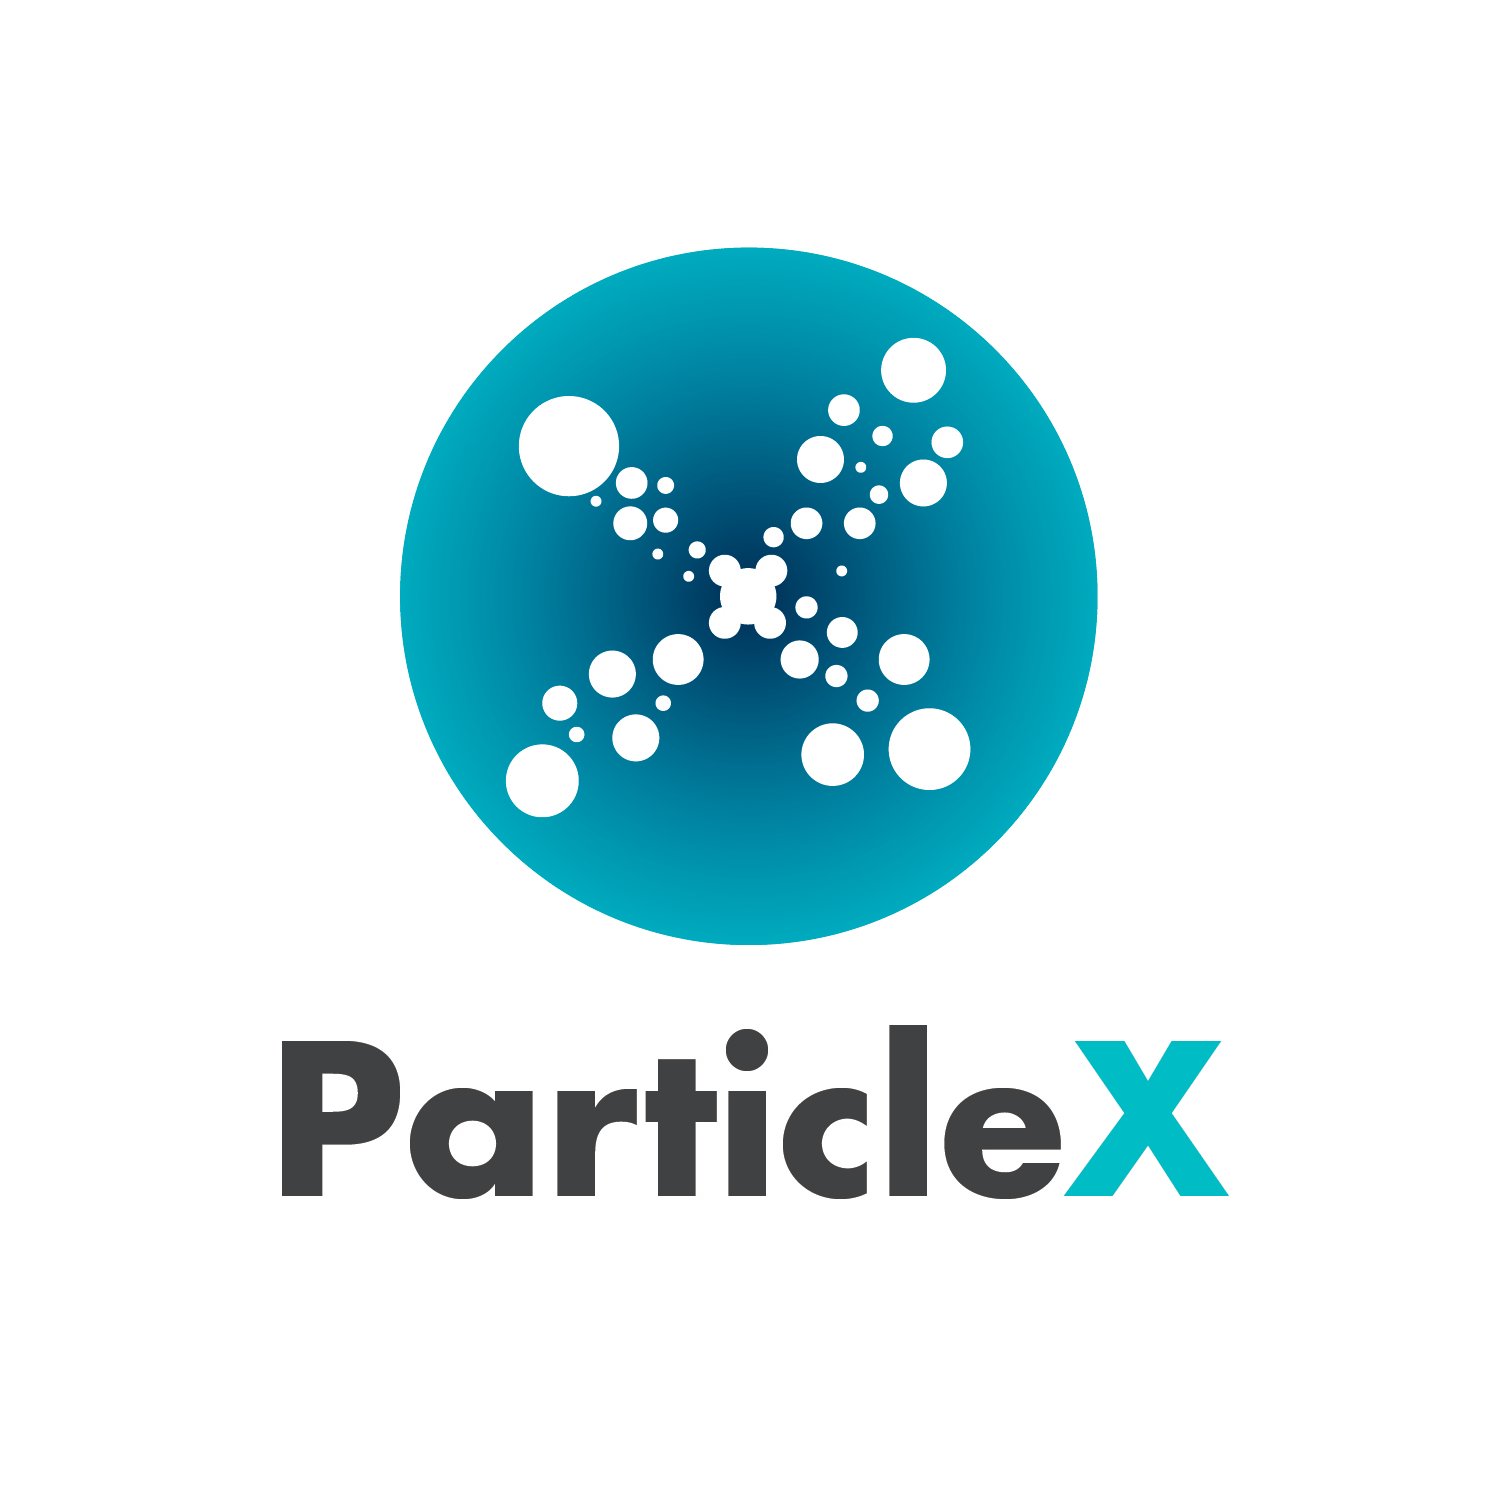 ParticleX aims at accelerating the growth rate of tech startups focused on the domains of Big Data, AI, IOT, Blockchain, Machine Learning, Robotics, etc.